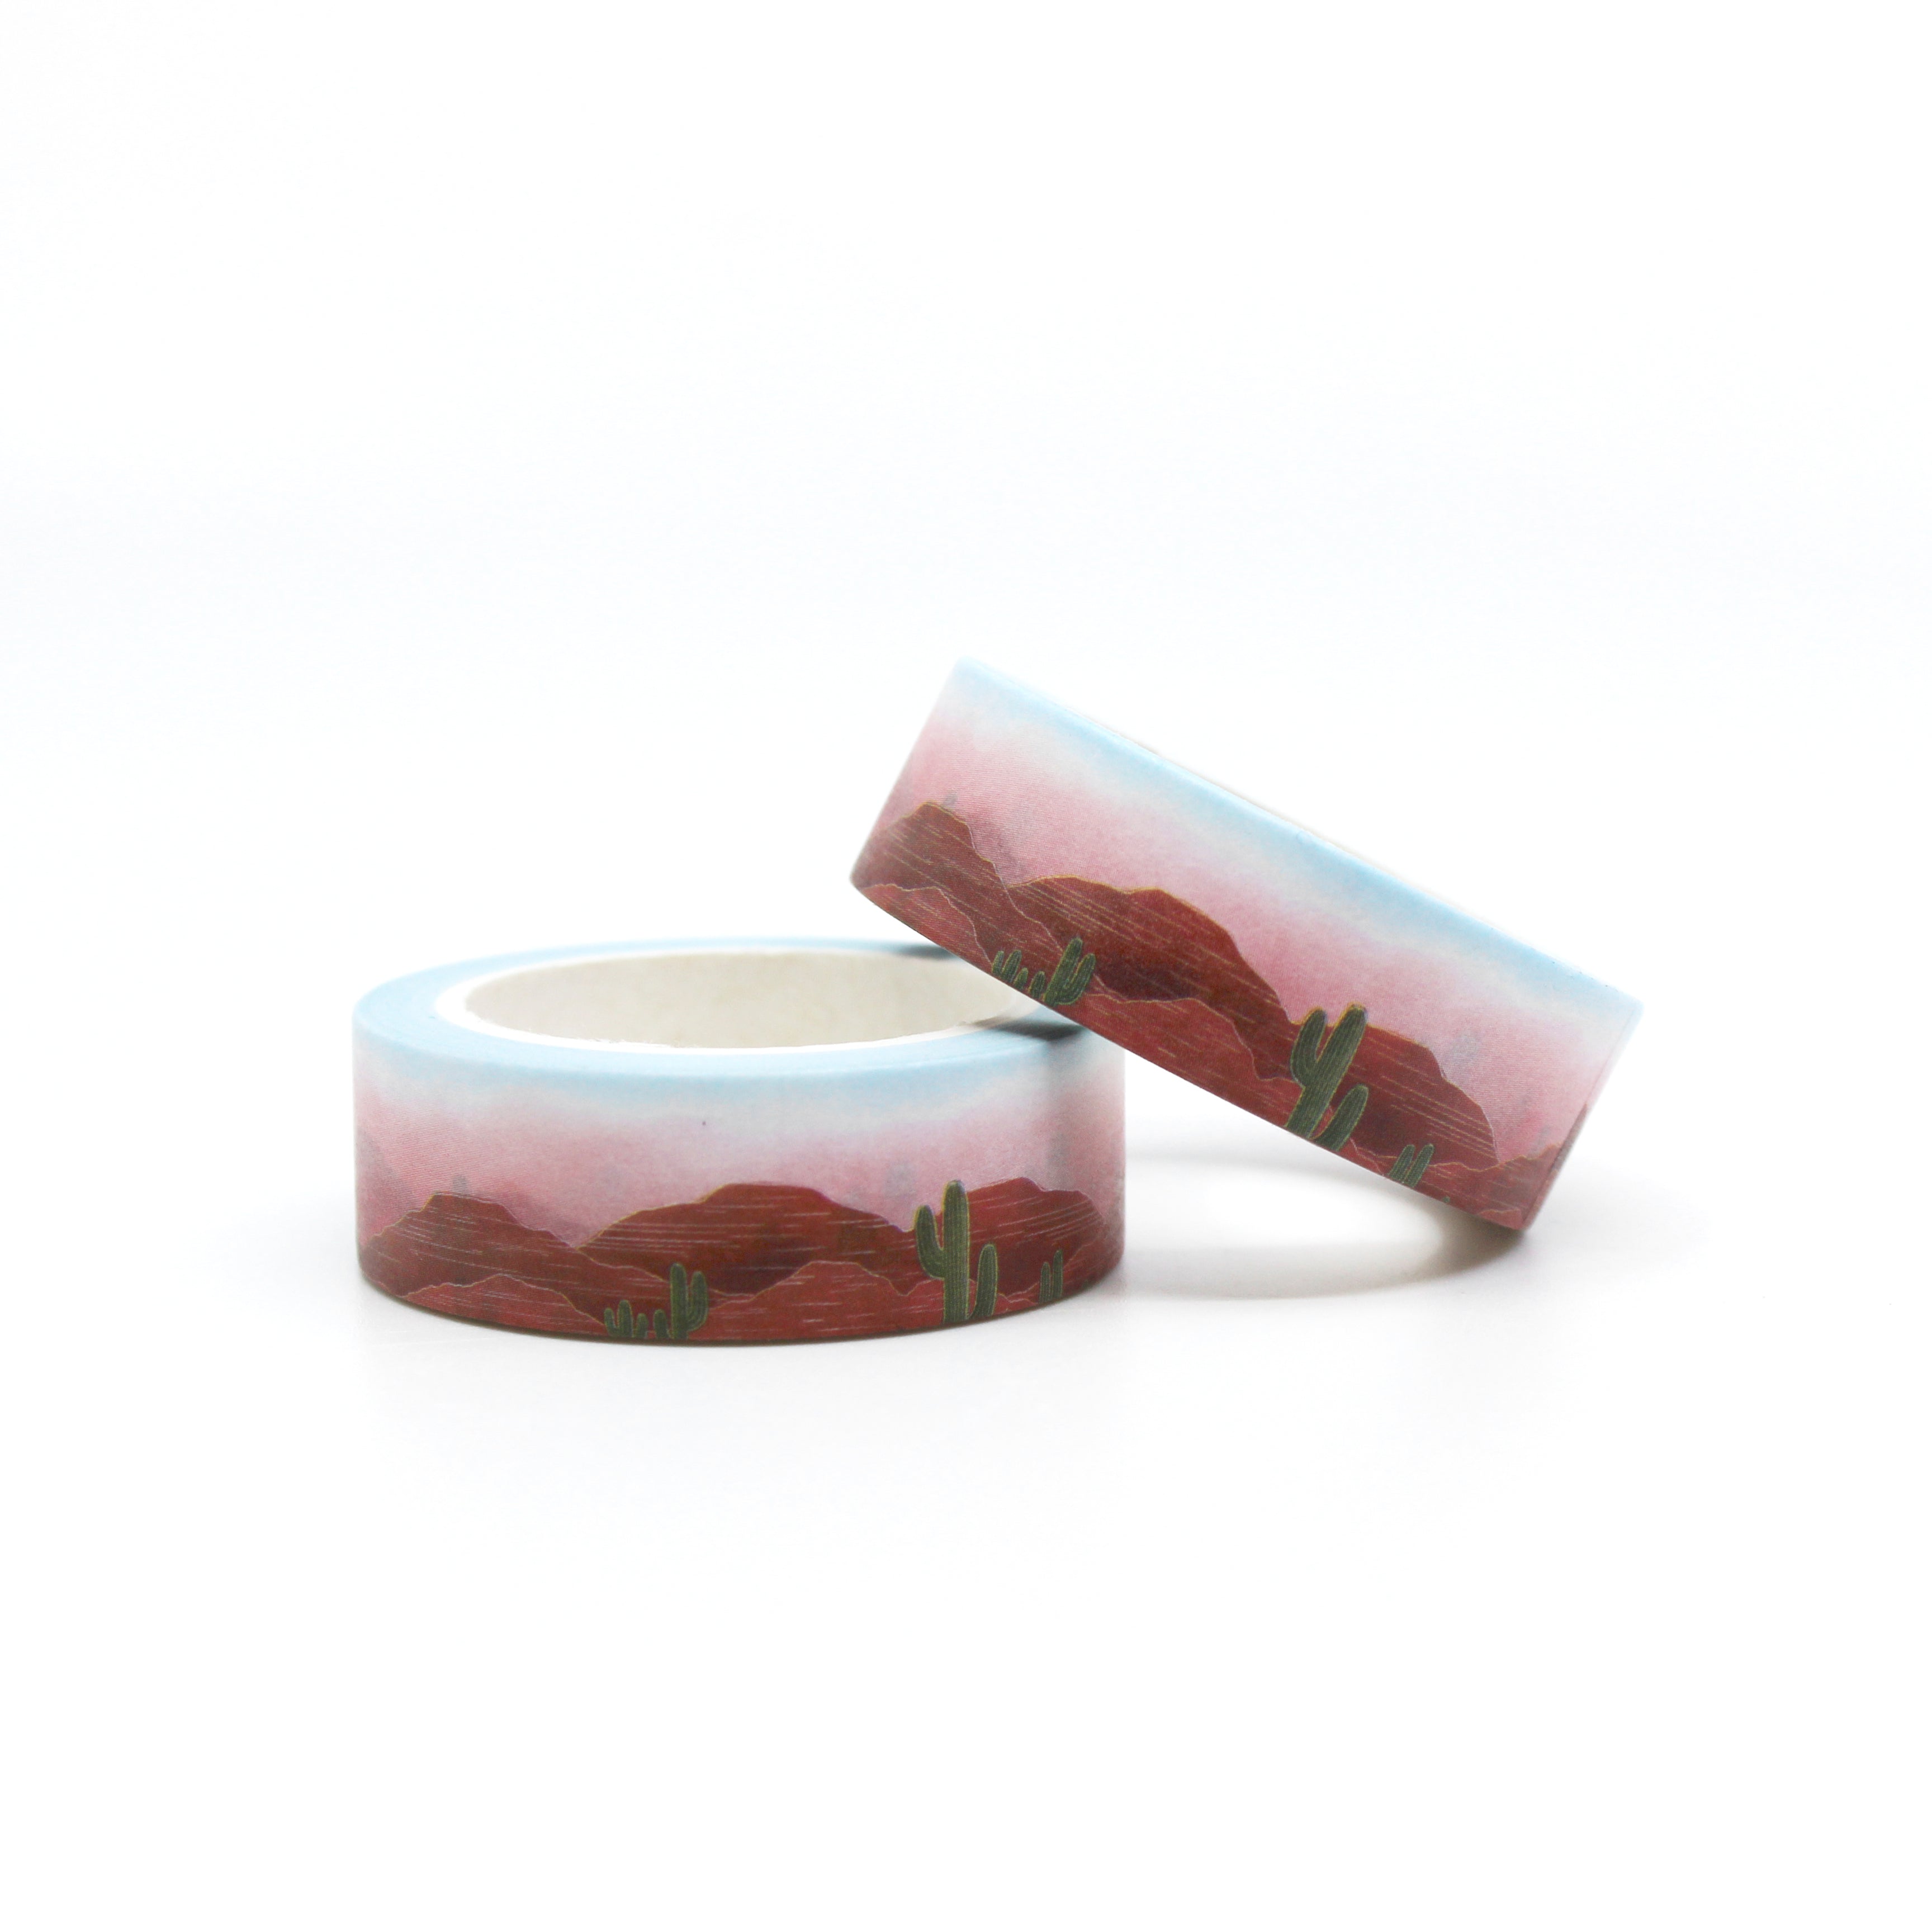 This is a roll of orange and black desert landscape washi tapes from BBB Supplies Craft Shop